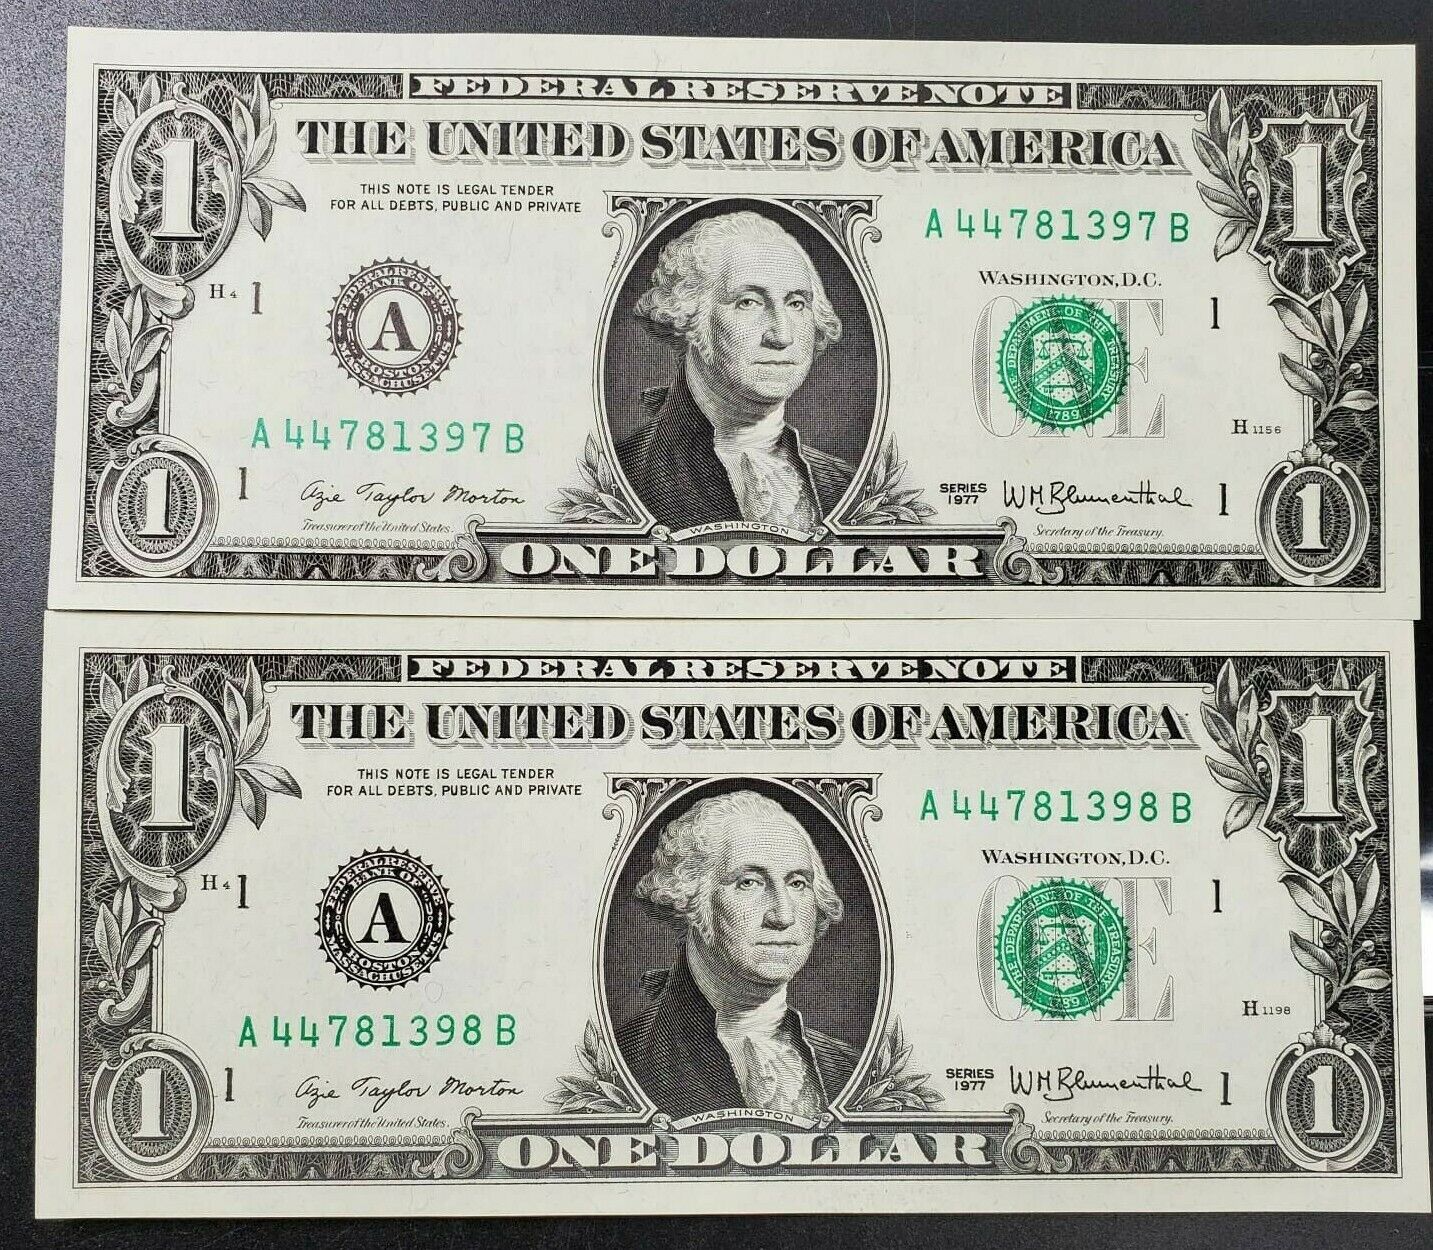 2 Consecutive 1977 $1 FRN Federal Reserve Note Green Seal Choice UNC Boston